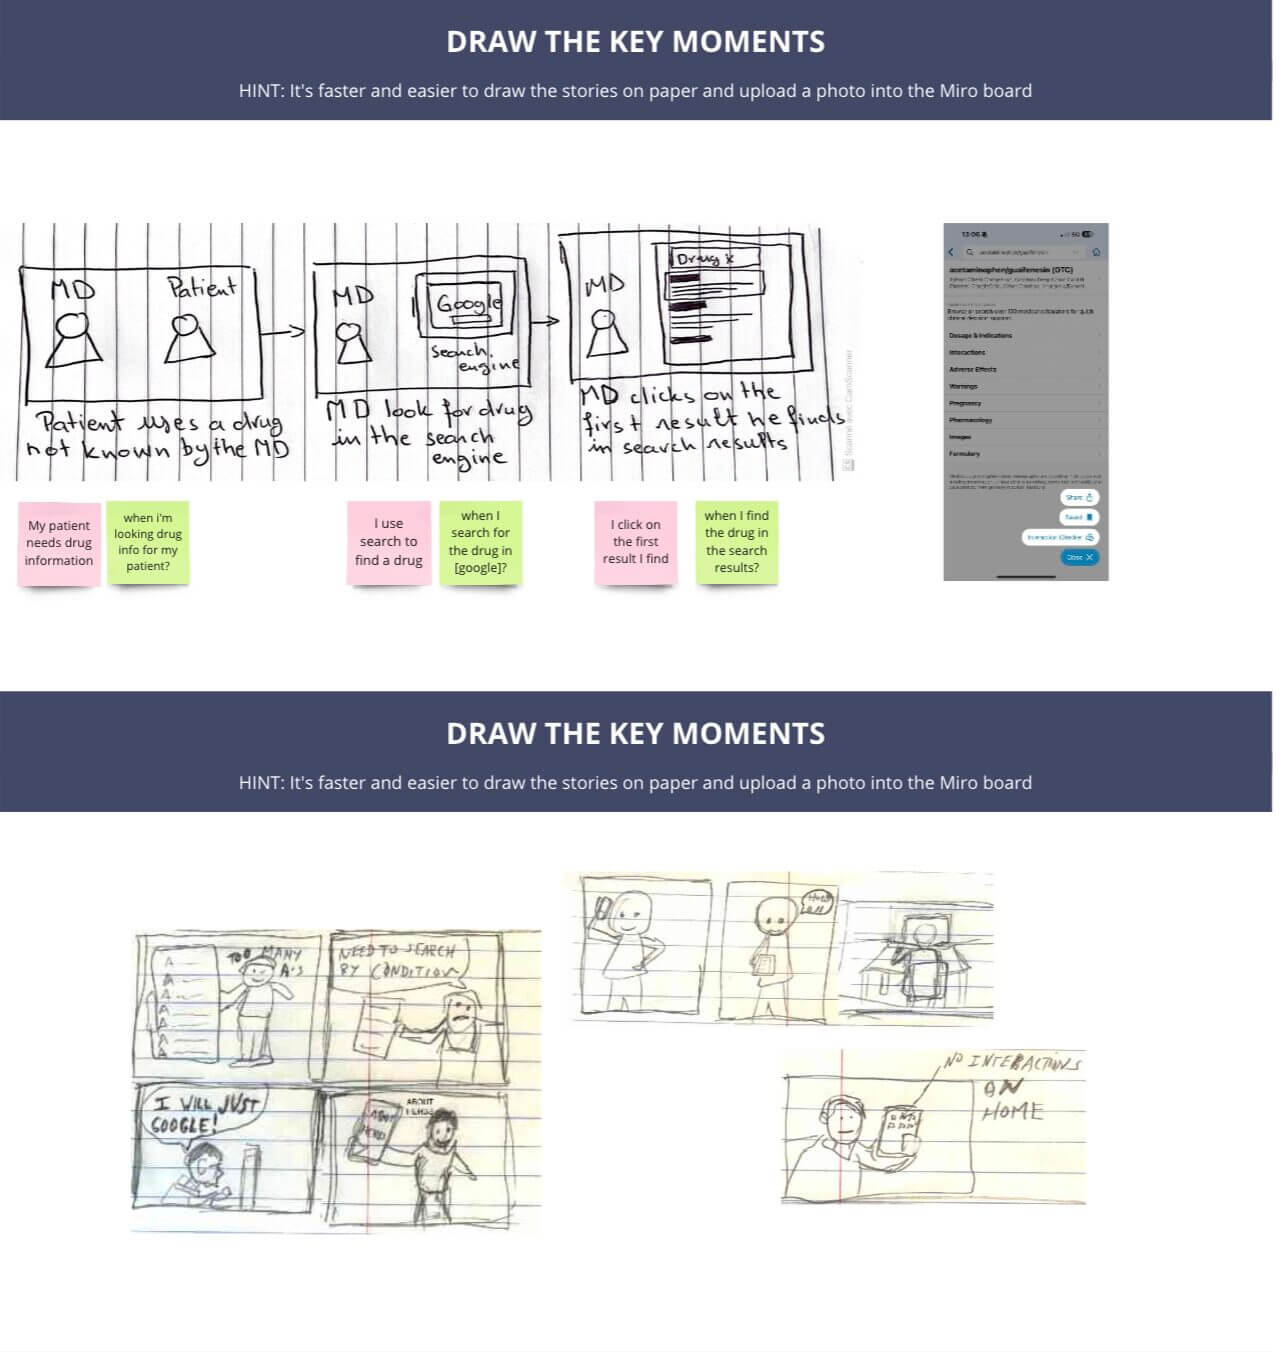 A screenshot from a Miro board labeled "Draw the Key Moments." There are several simple hand-drawn sketches that show different stages of the user's journey.